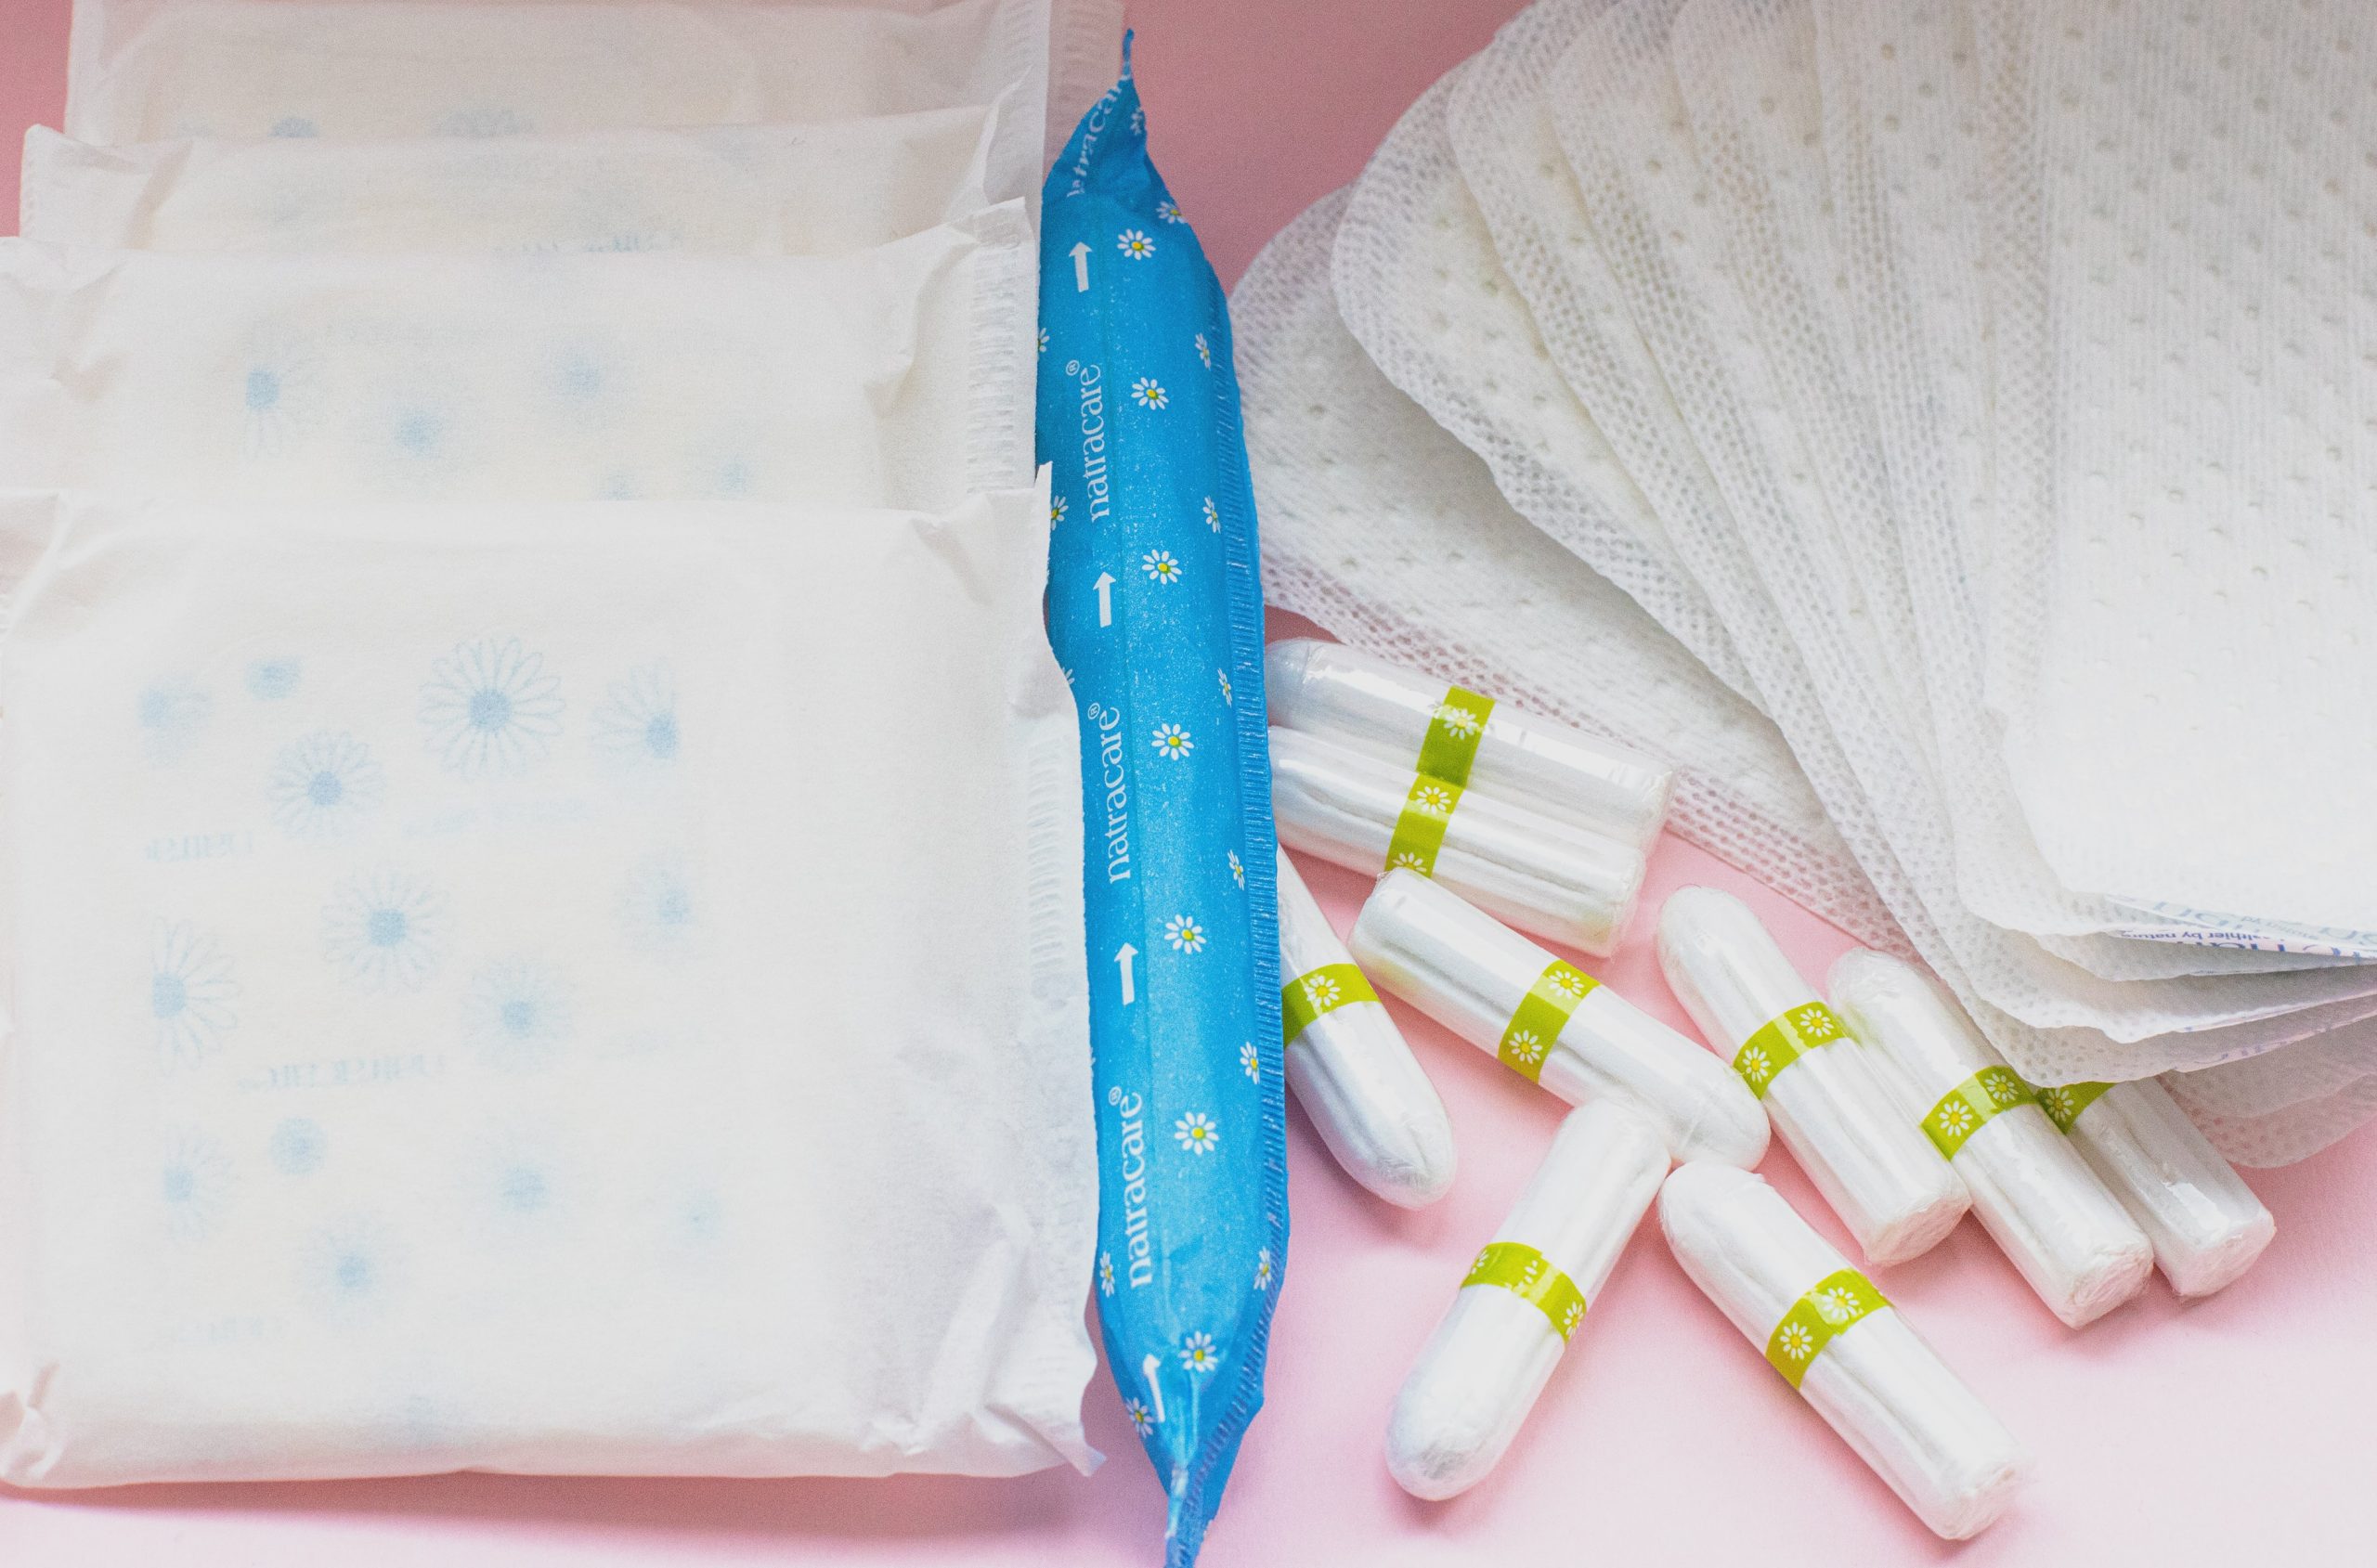 How To Speed Up Your Periods hygiene products scaled